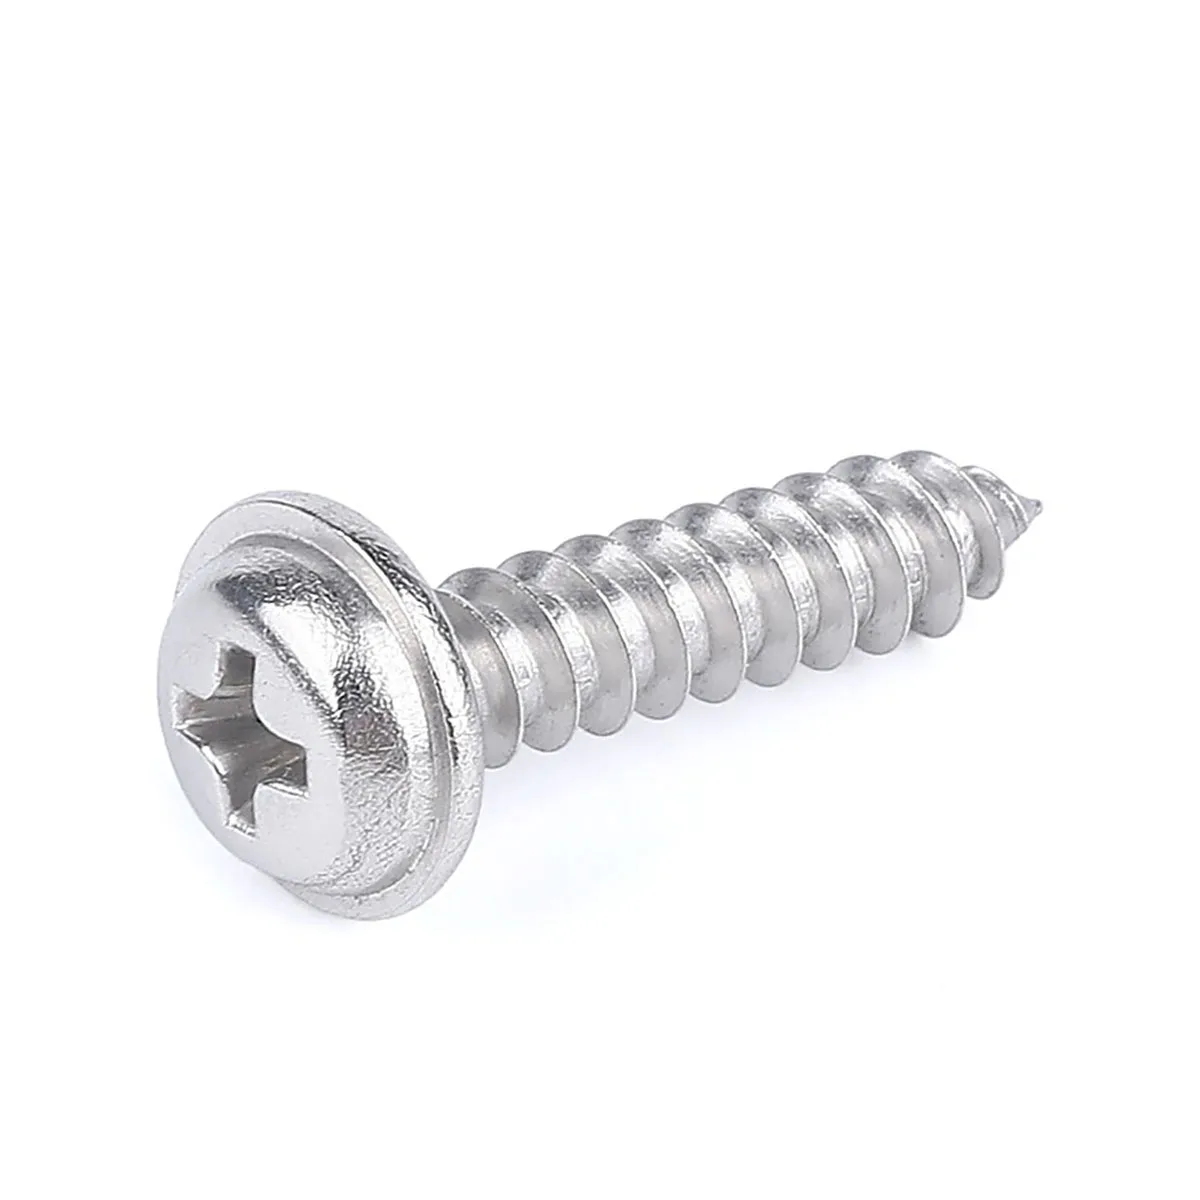 M2 M2.3 M2.6 M3 M4 A2 304 Stainless Steel PWA Cross Phillips Pan Round Head With Washer Collar Self Tapping Screws images - 6